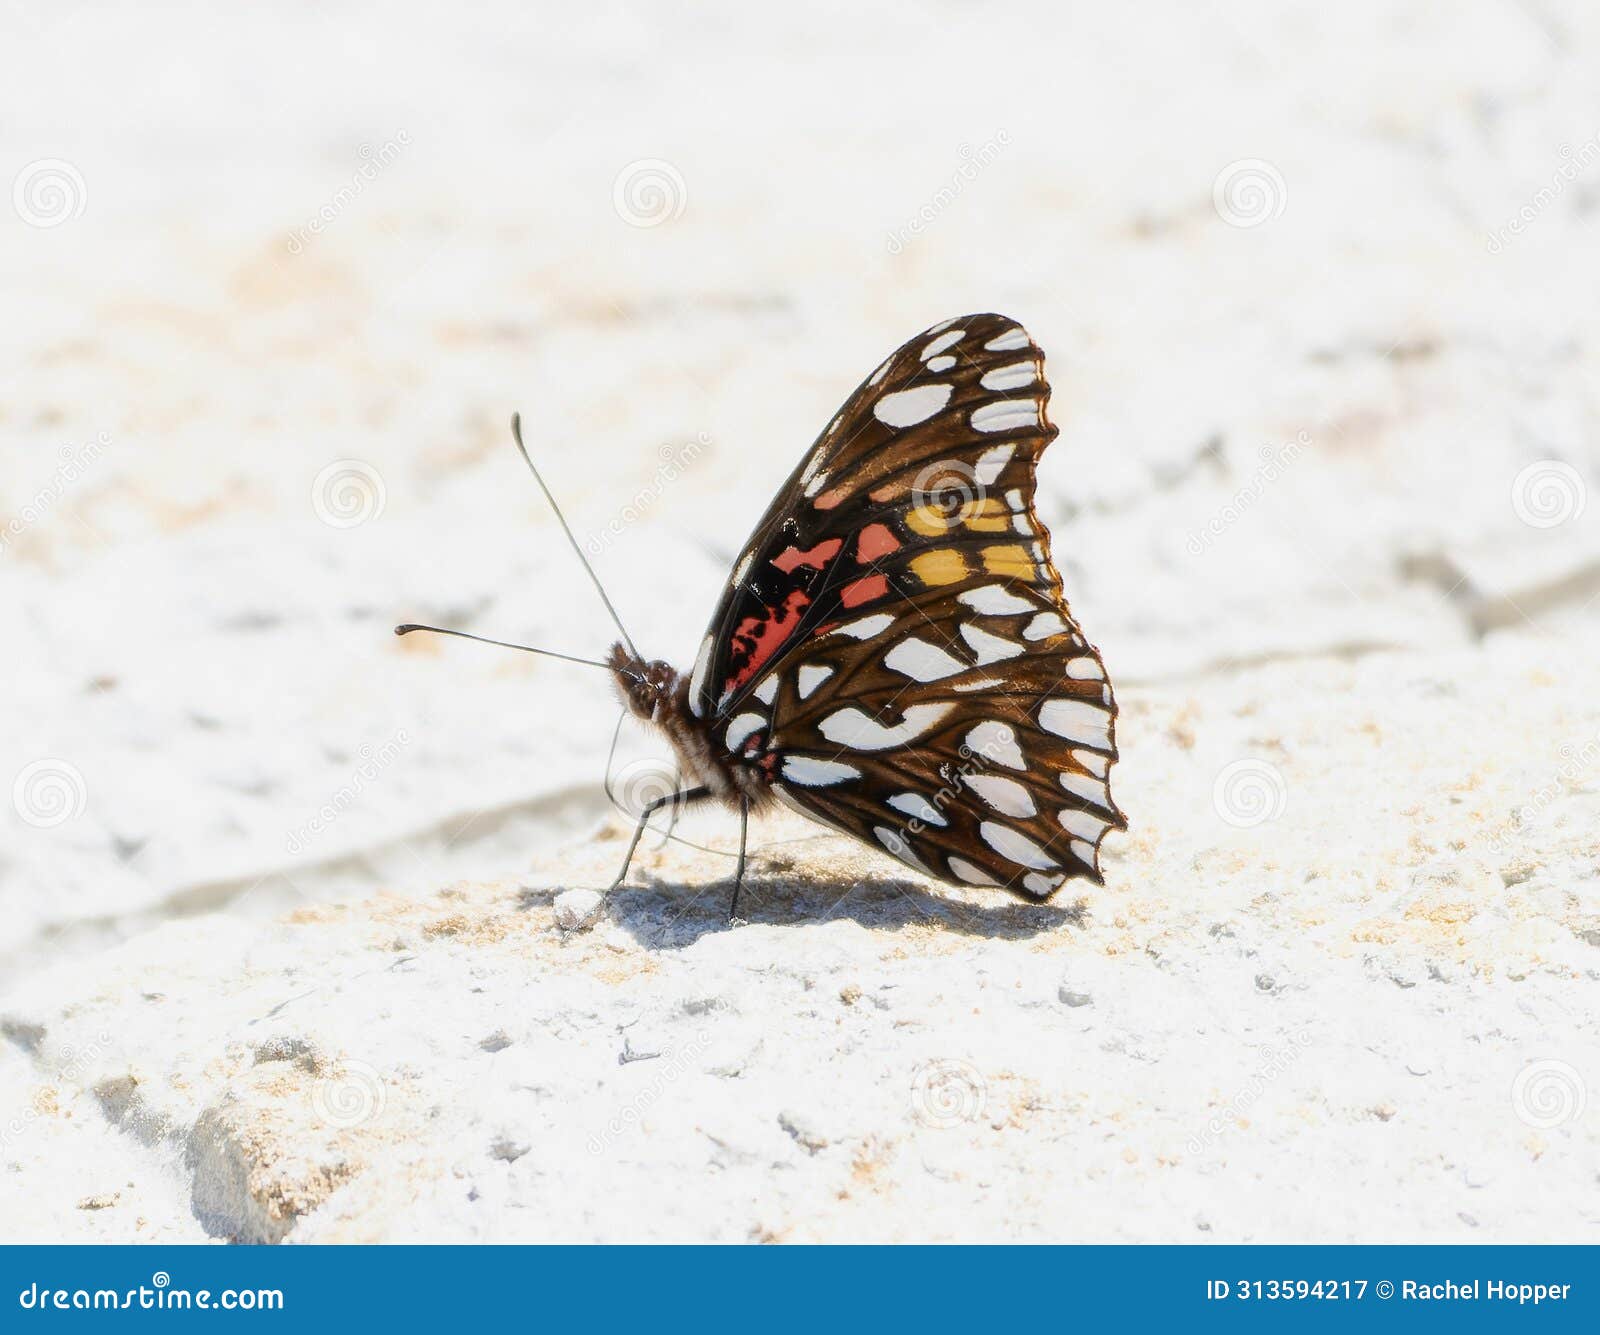 a close-up view of a mexican silverspot butterfly, dione moneta, resting on a white surface in mexico